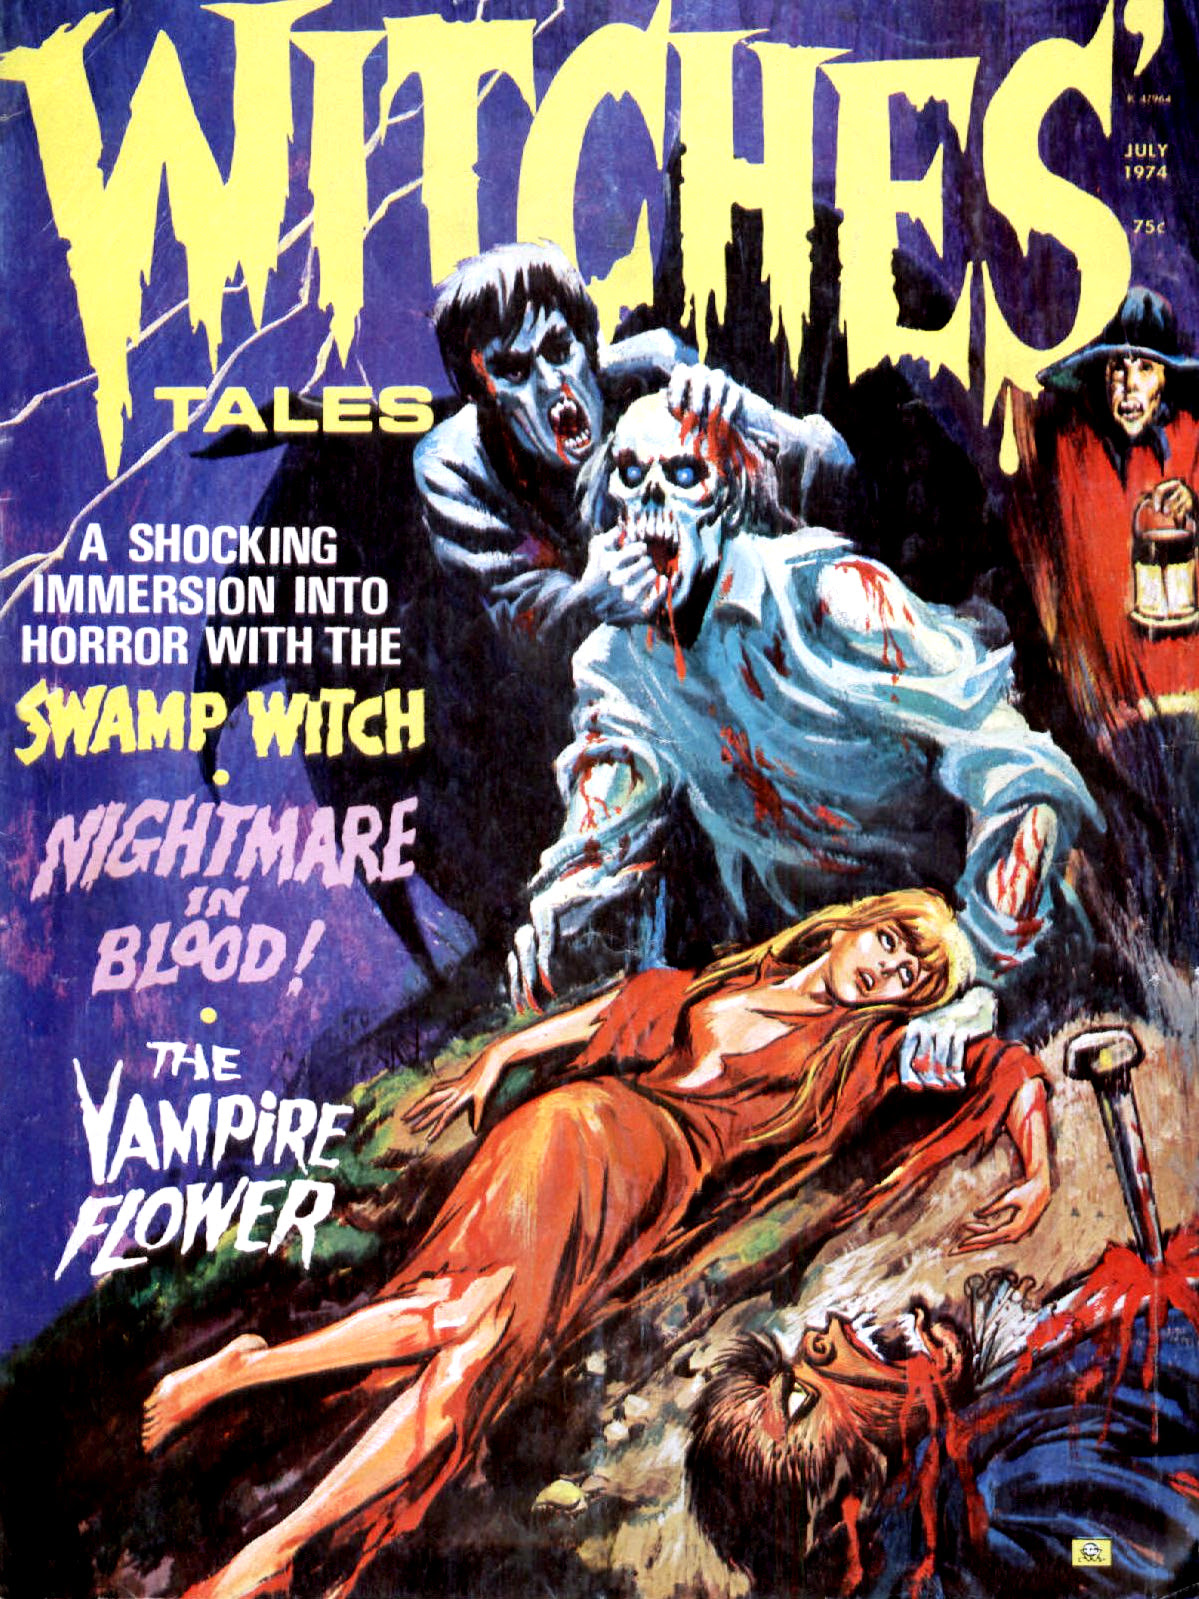 Witches' Tales Vol. 6 #4 (Eerie Publications 1974)